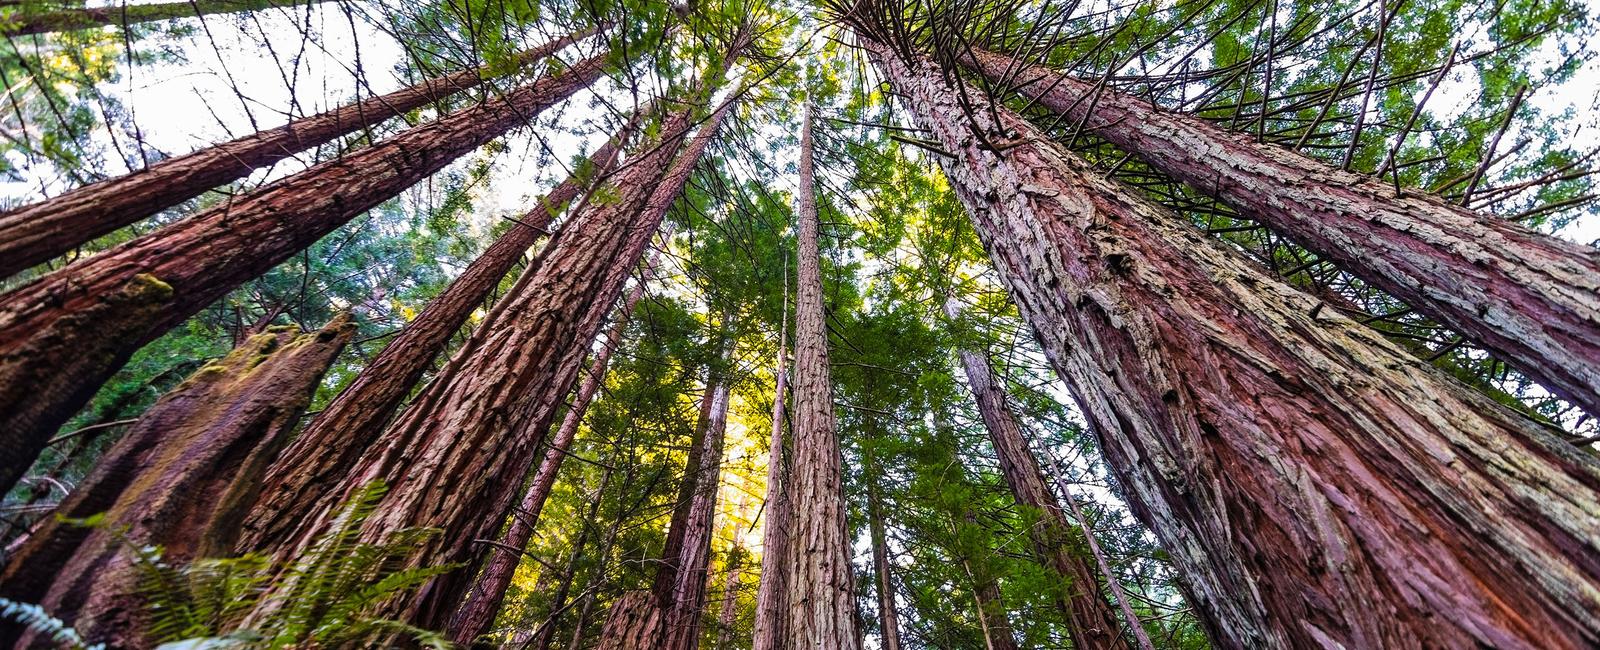 The world s tallest tree is the coastal redwood of california it grows up to 379 feet with some trees nearly 2 000 years old